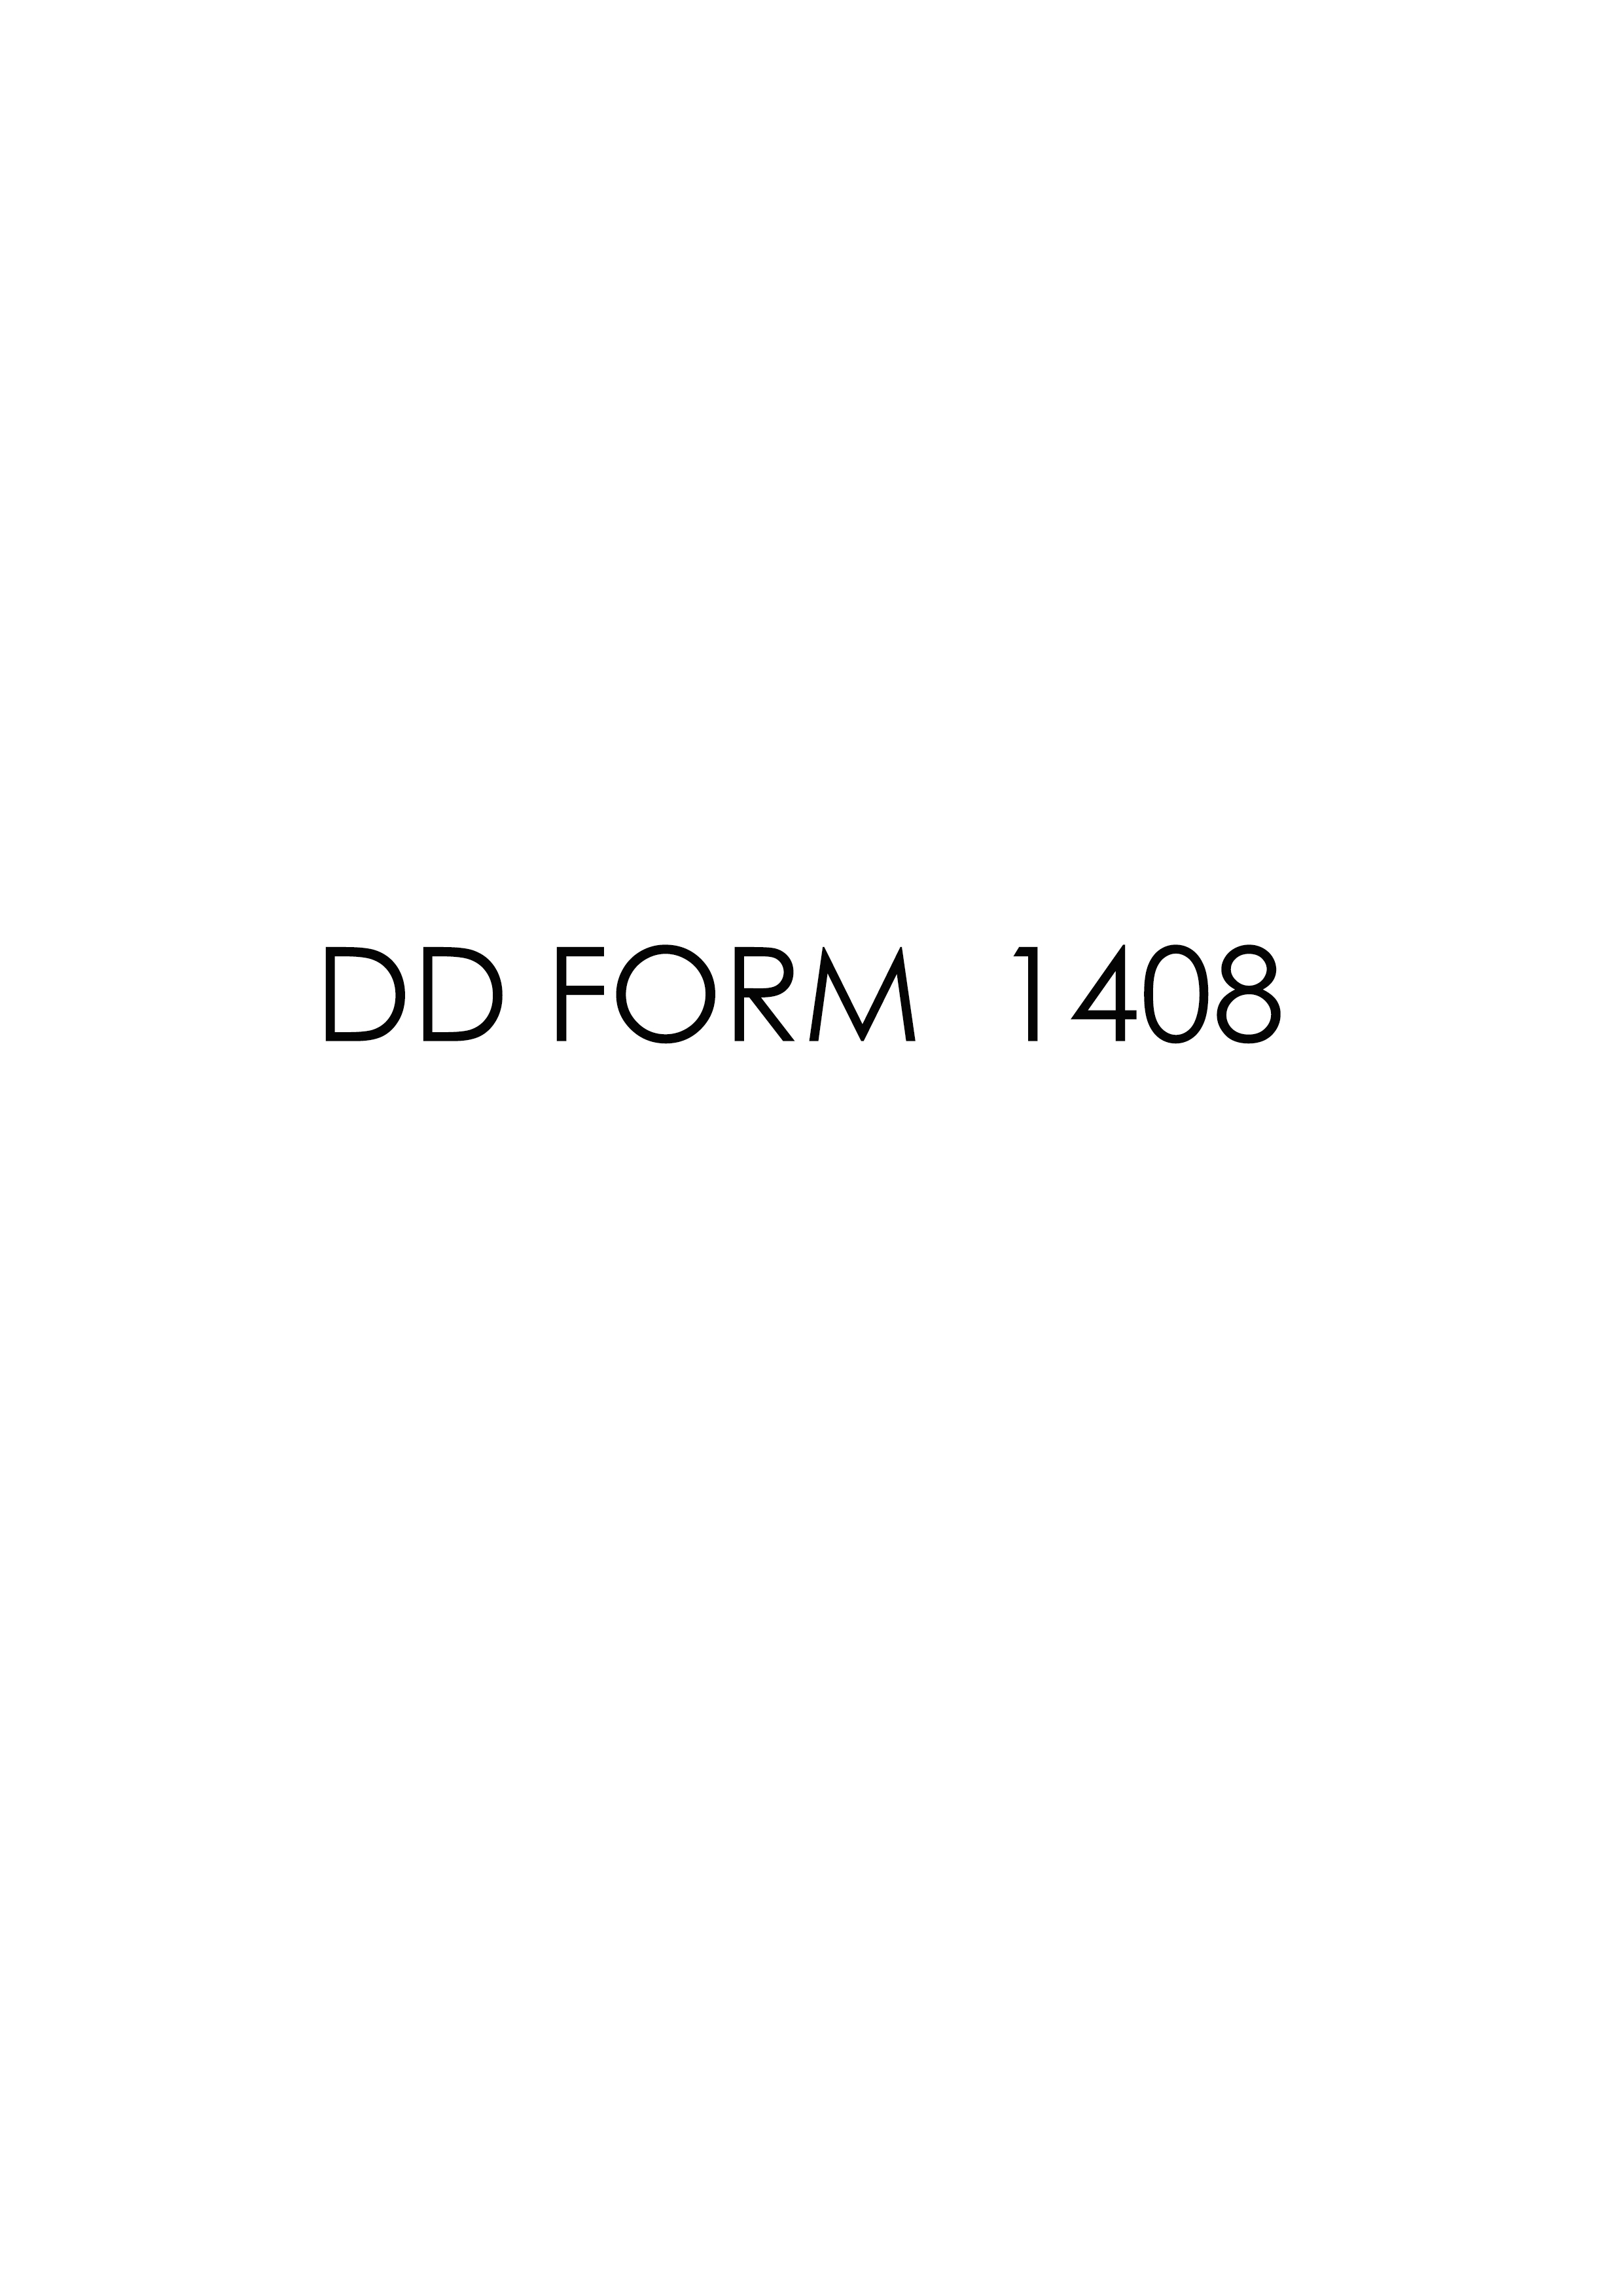 Download Fillable dd Form 1408